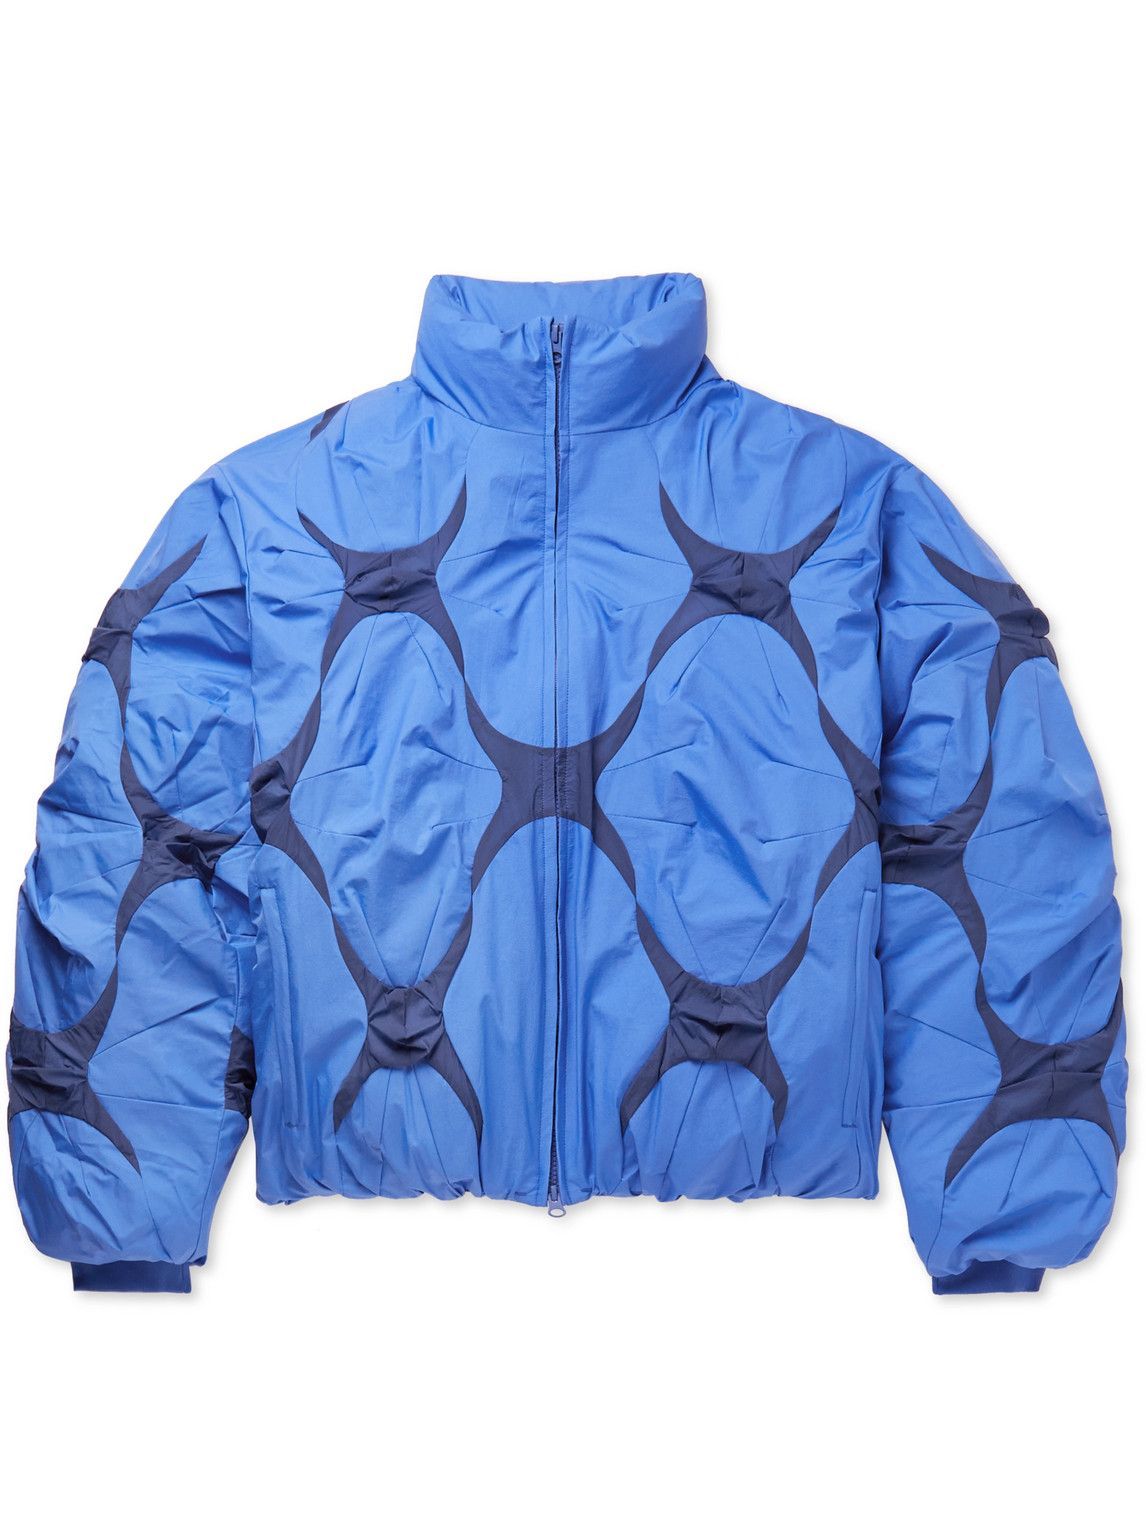 POST ARCHIVE FACTION - 4.0 Left Quilted Patchwork Ripstop-Nylon Down ...